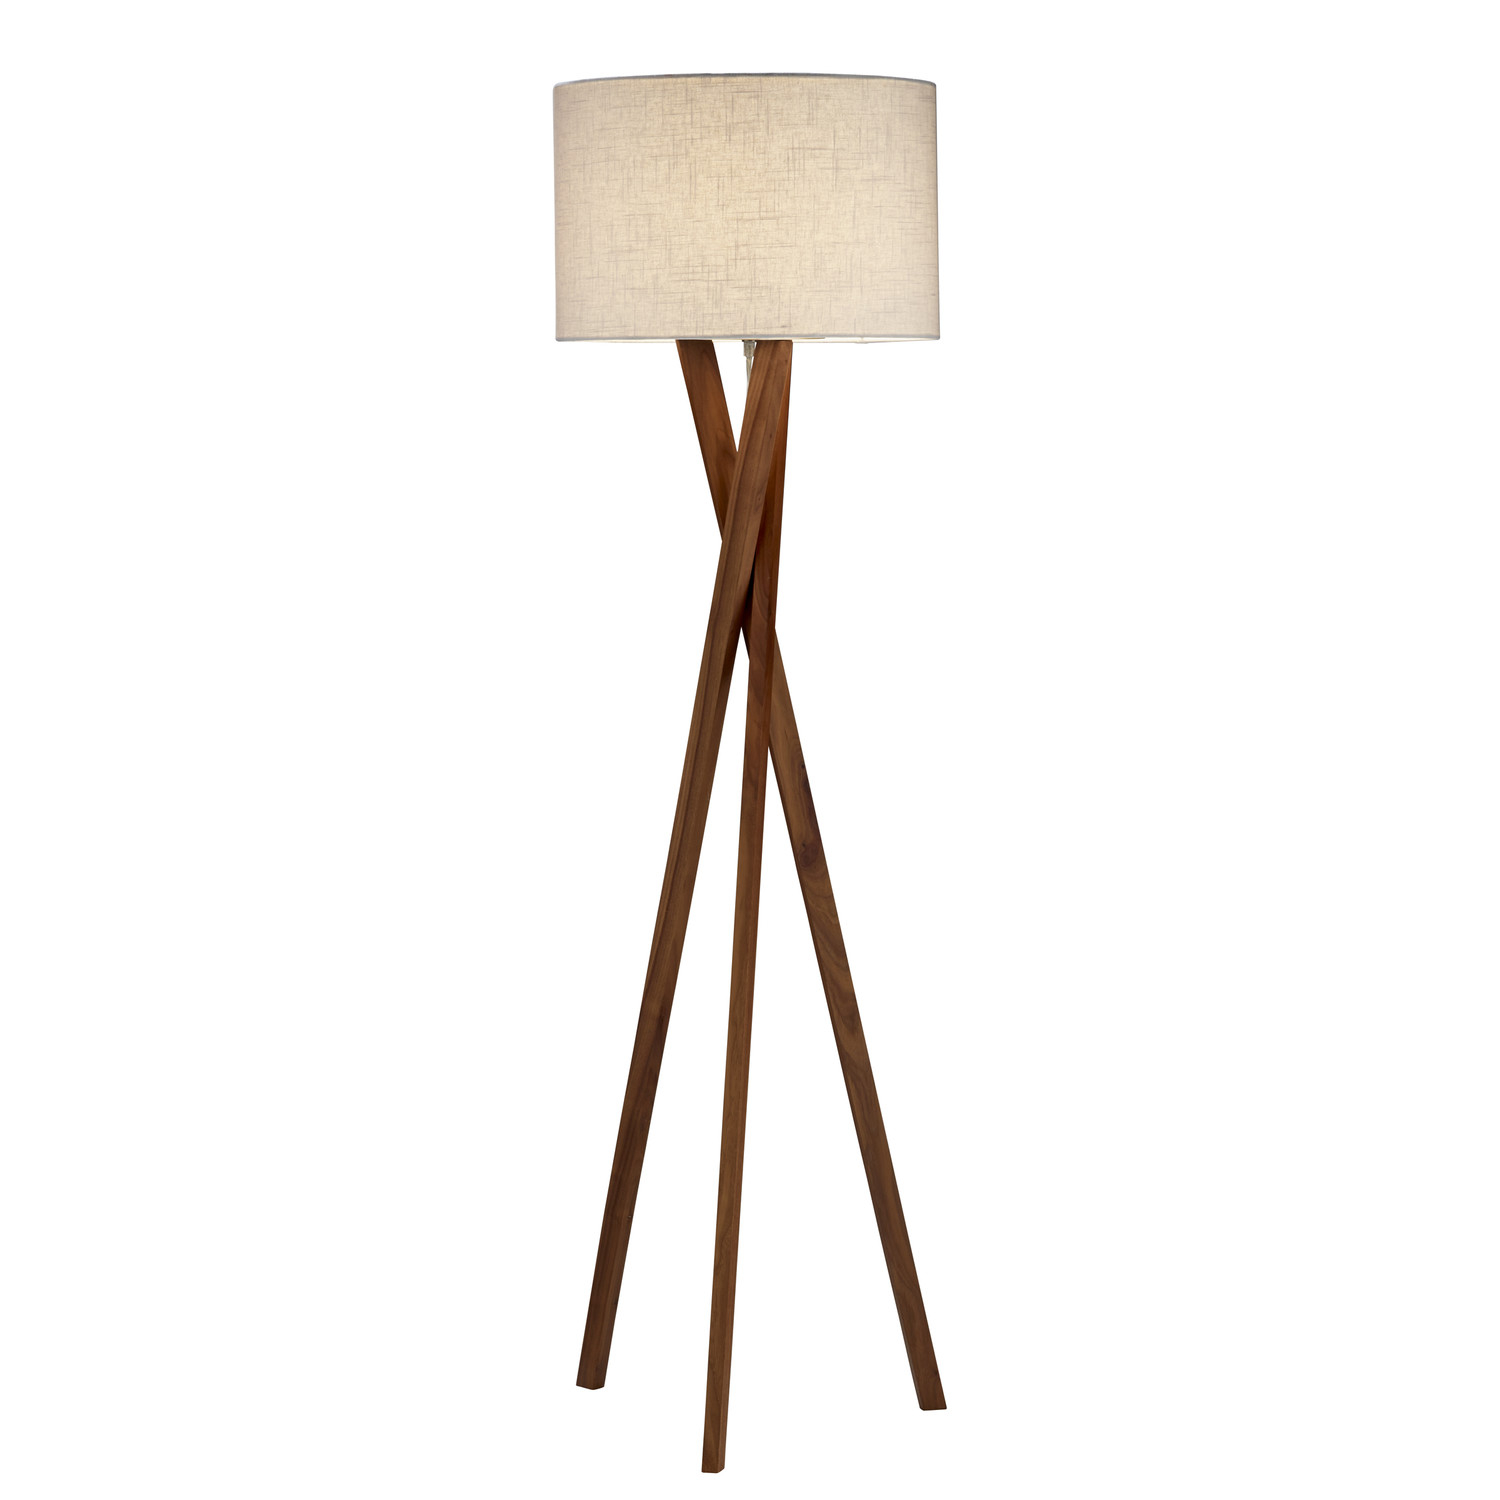 Modern Romantic Floor Lamp Wooden Trend Including Image Q Au with regard to size 1500 X 1500